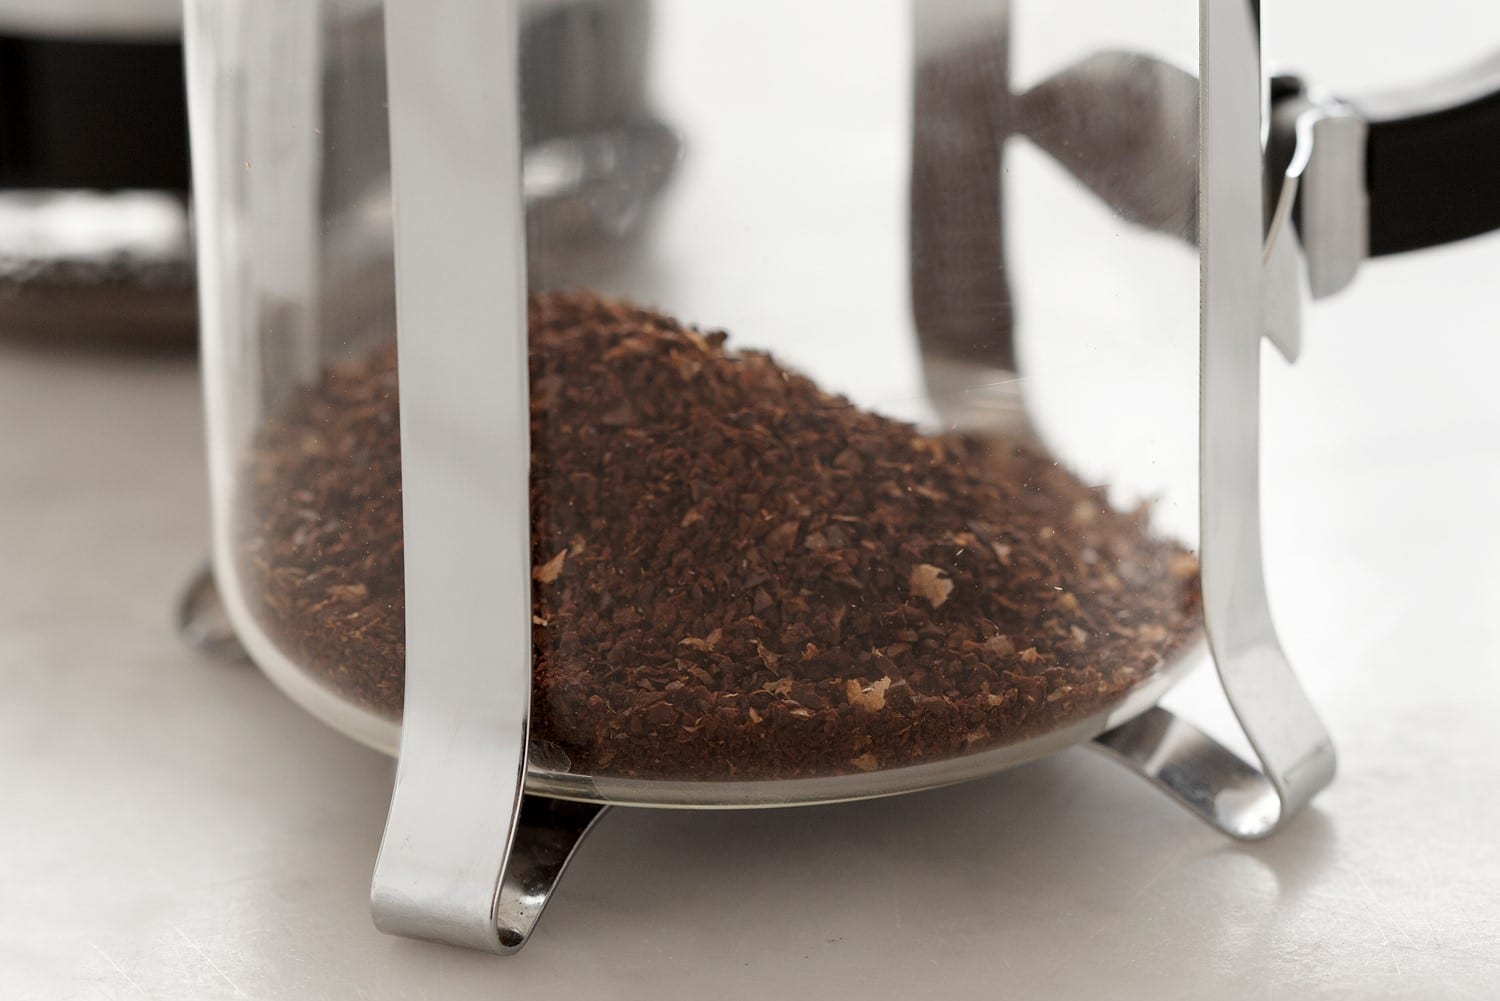 How to use a french press